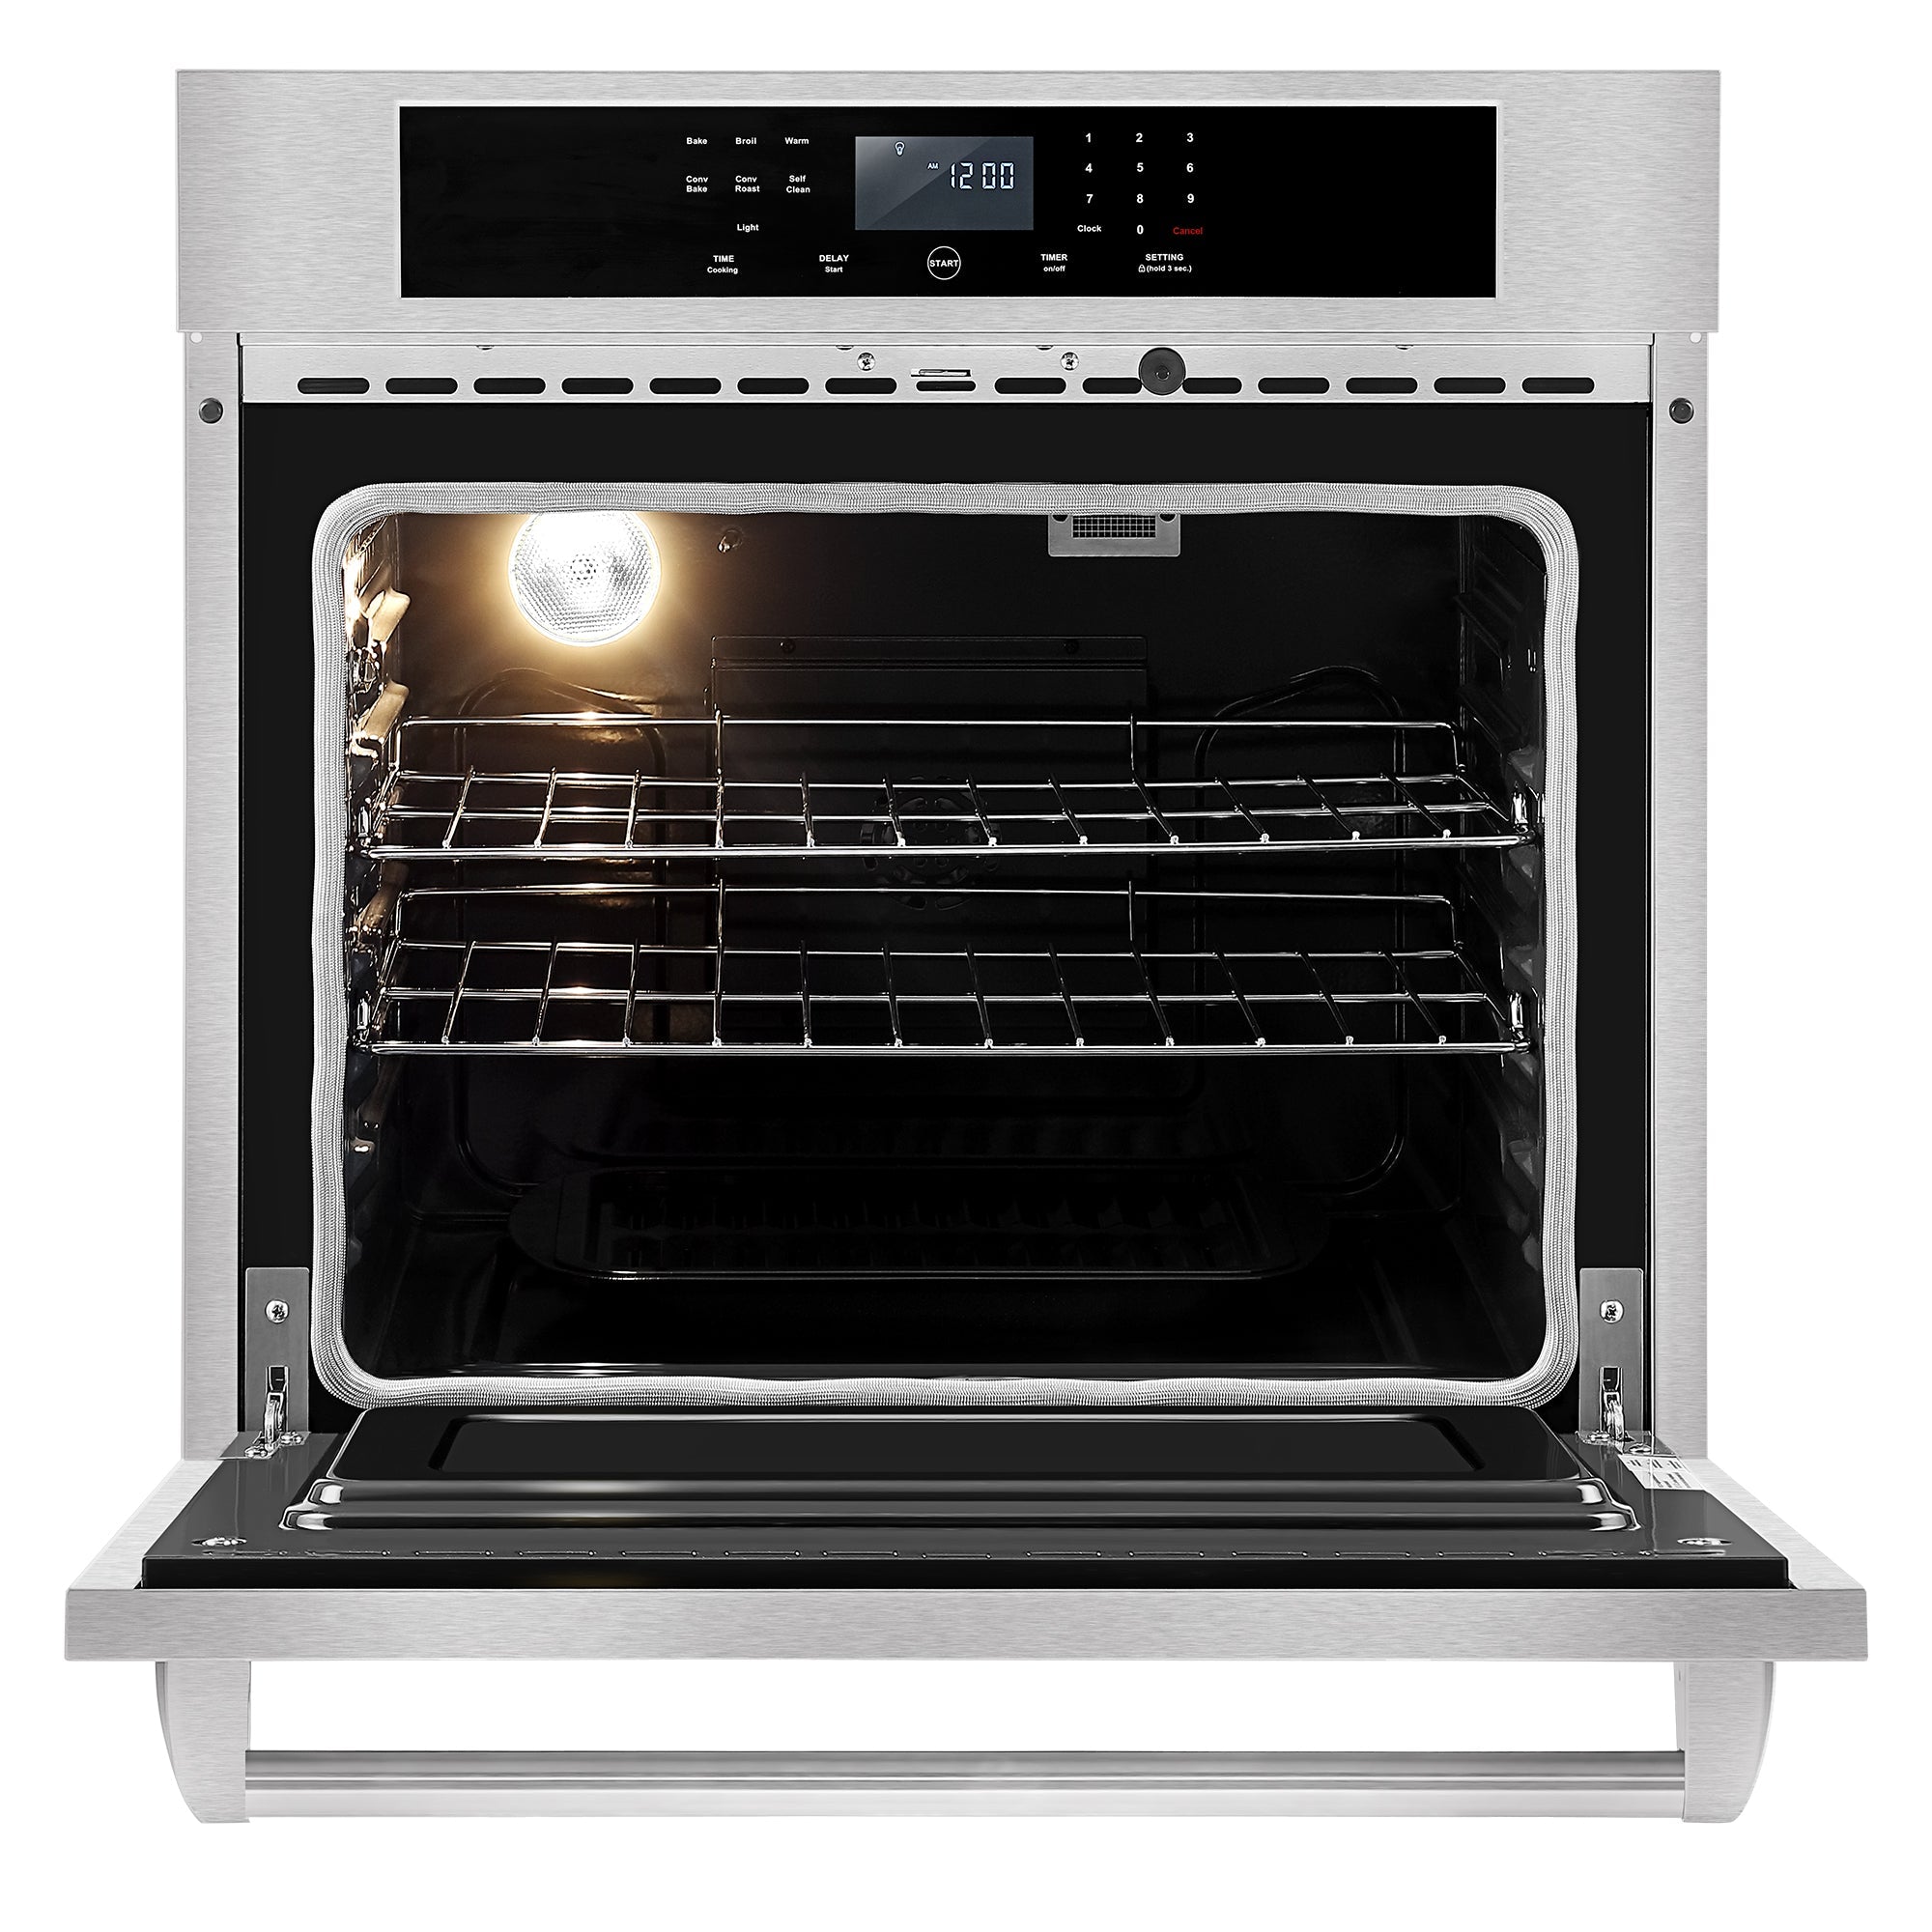 Empava 30WO03 30 in. Built-in Electric Single Wall Oven